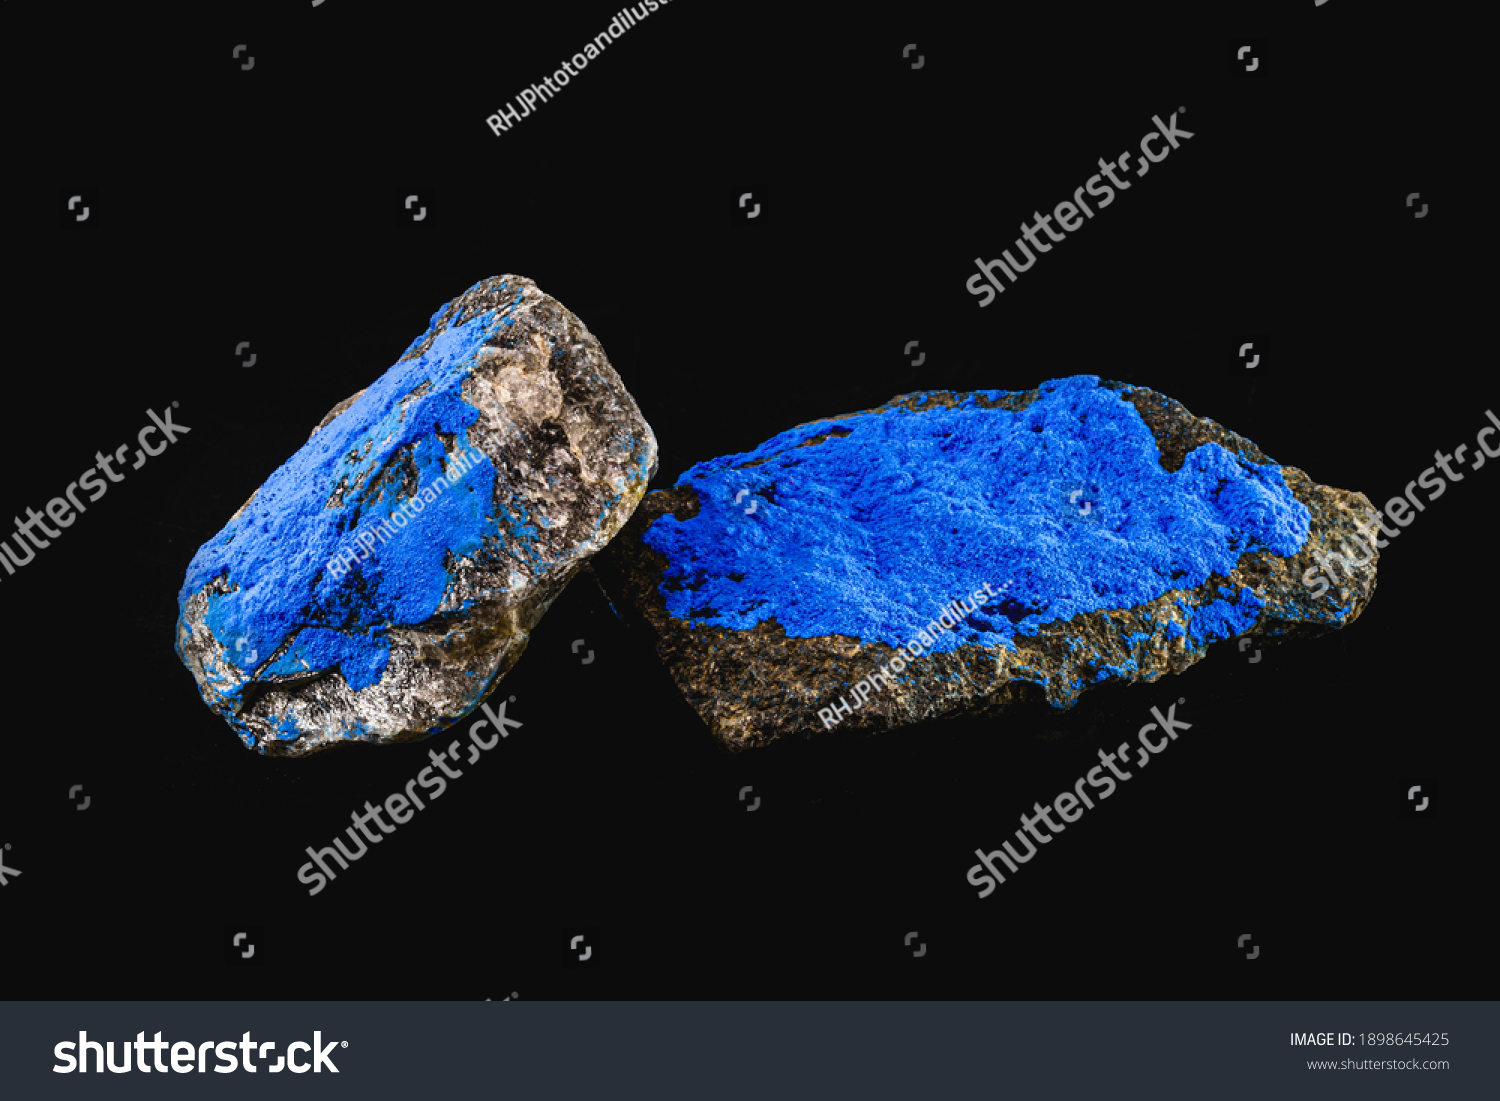 Cobalt is a chemical element present in the enameled mineral, blue pigment for industrial use #1898645425